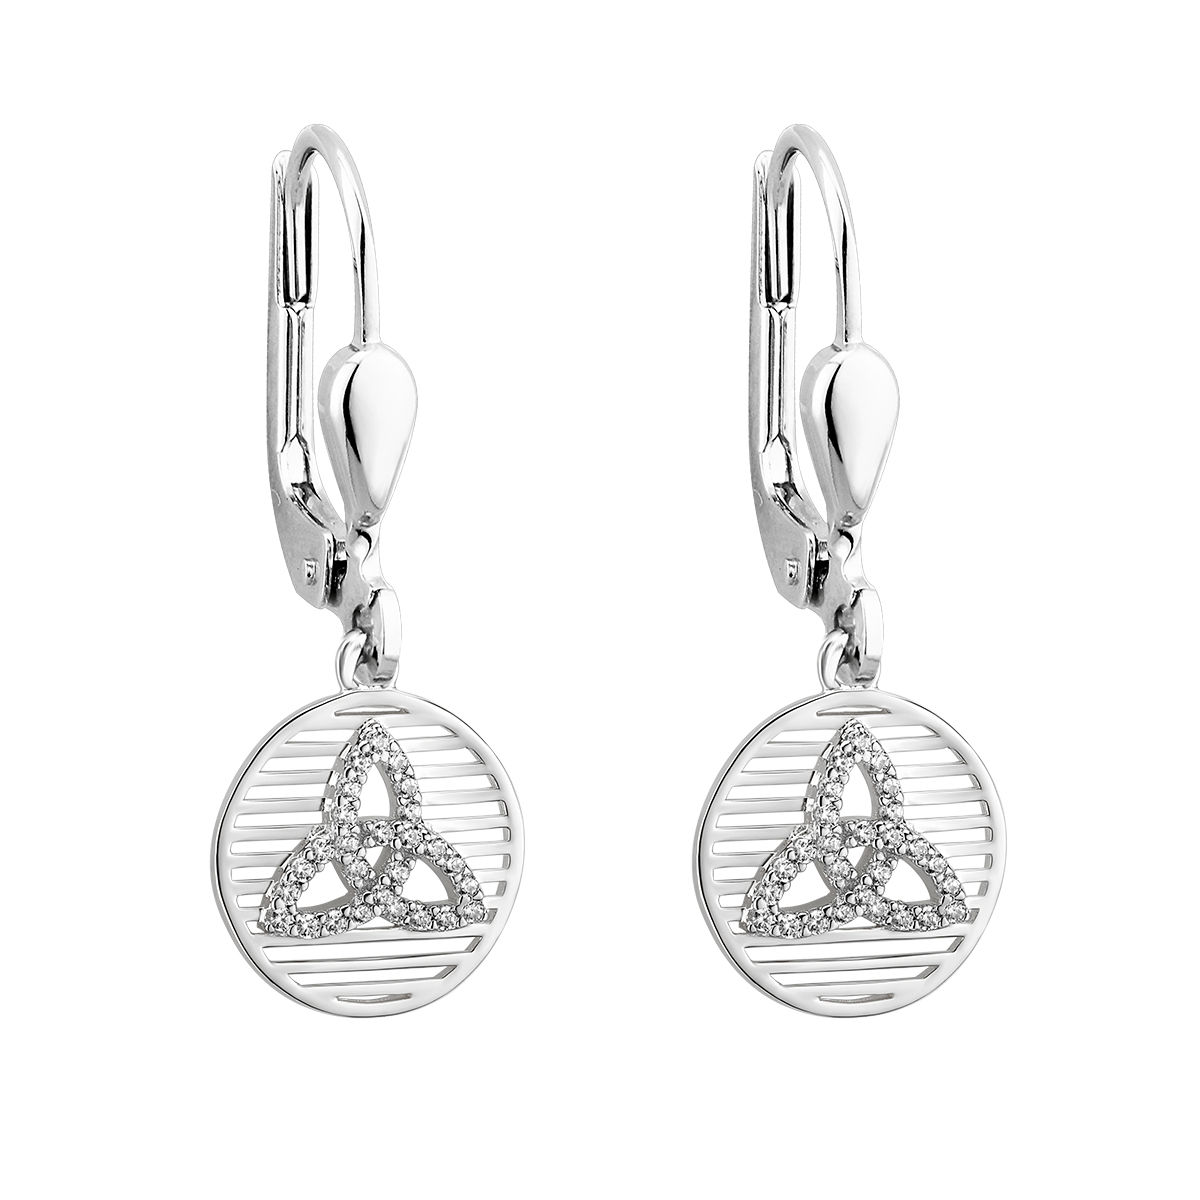 Product image for Irish Earrings | Sterling Silver Circle Drop Crystal Celtic Trinity Knot Earrings